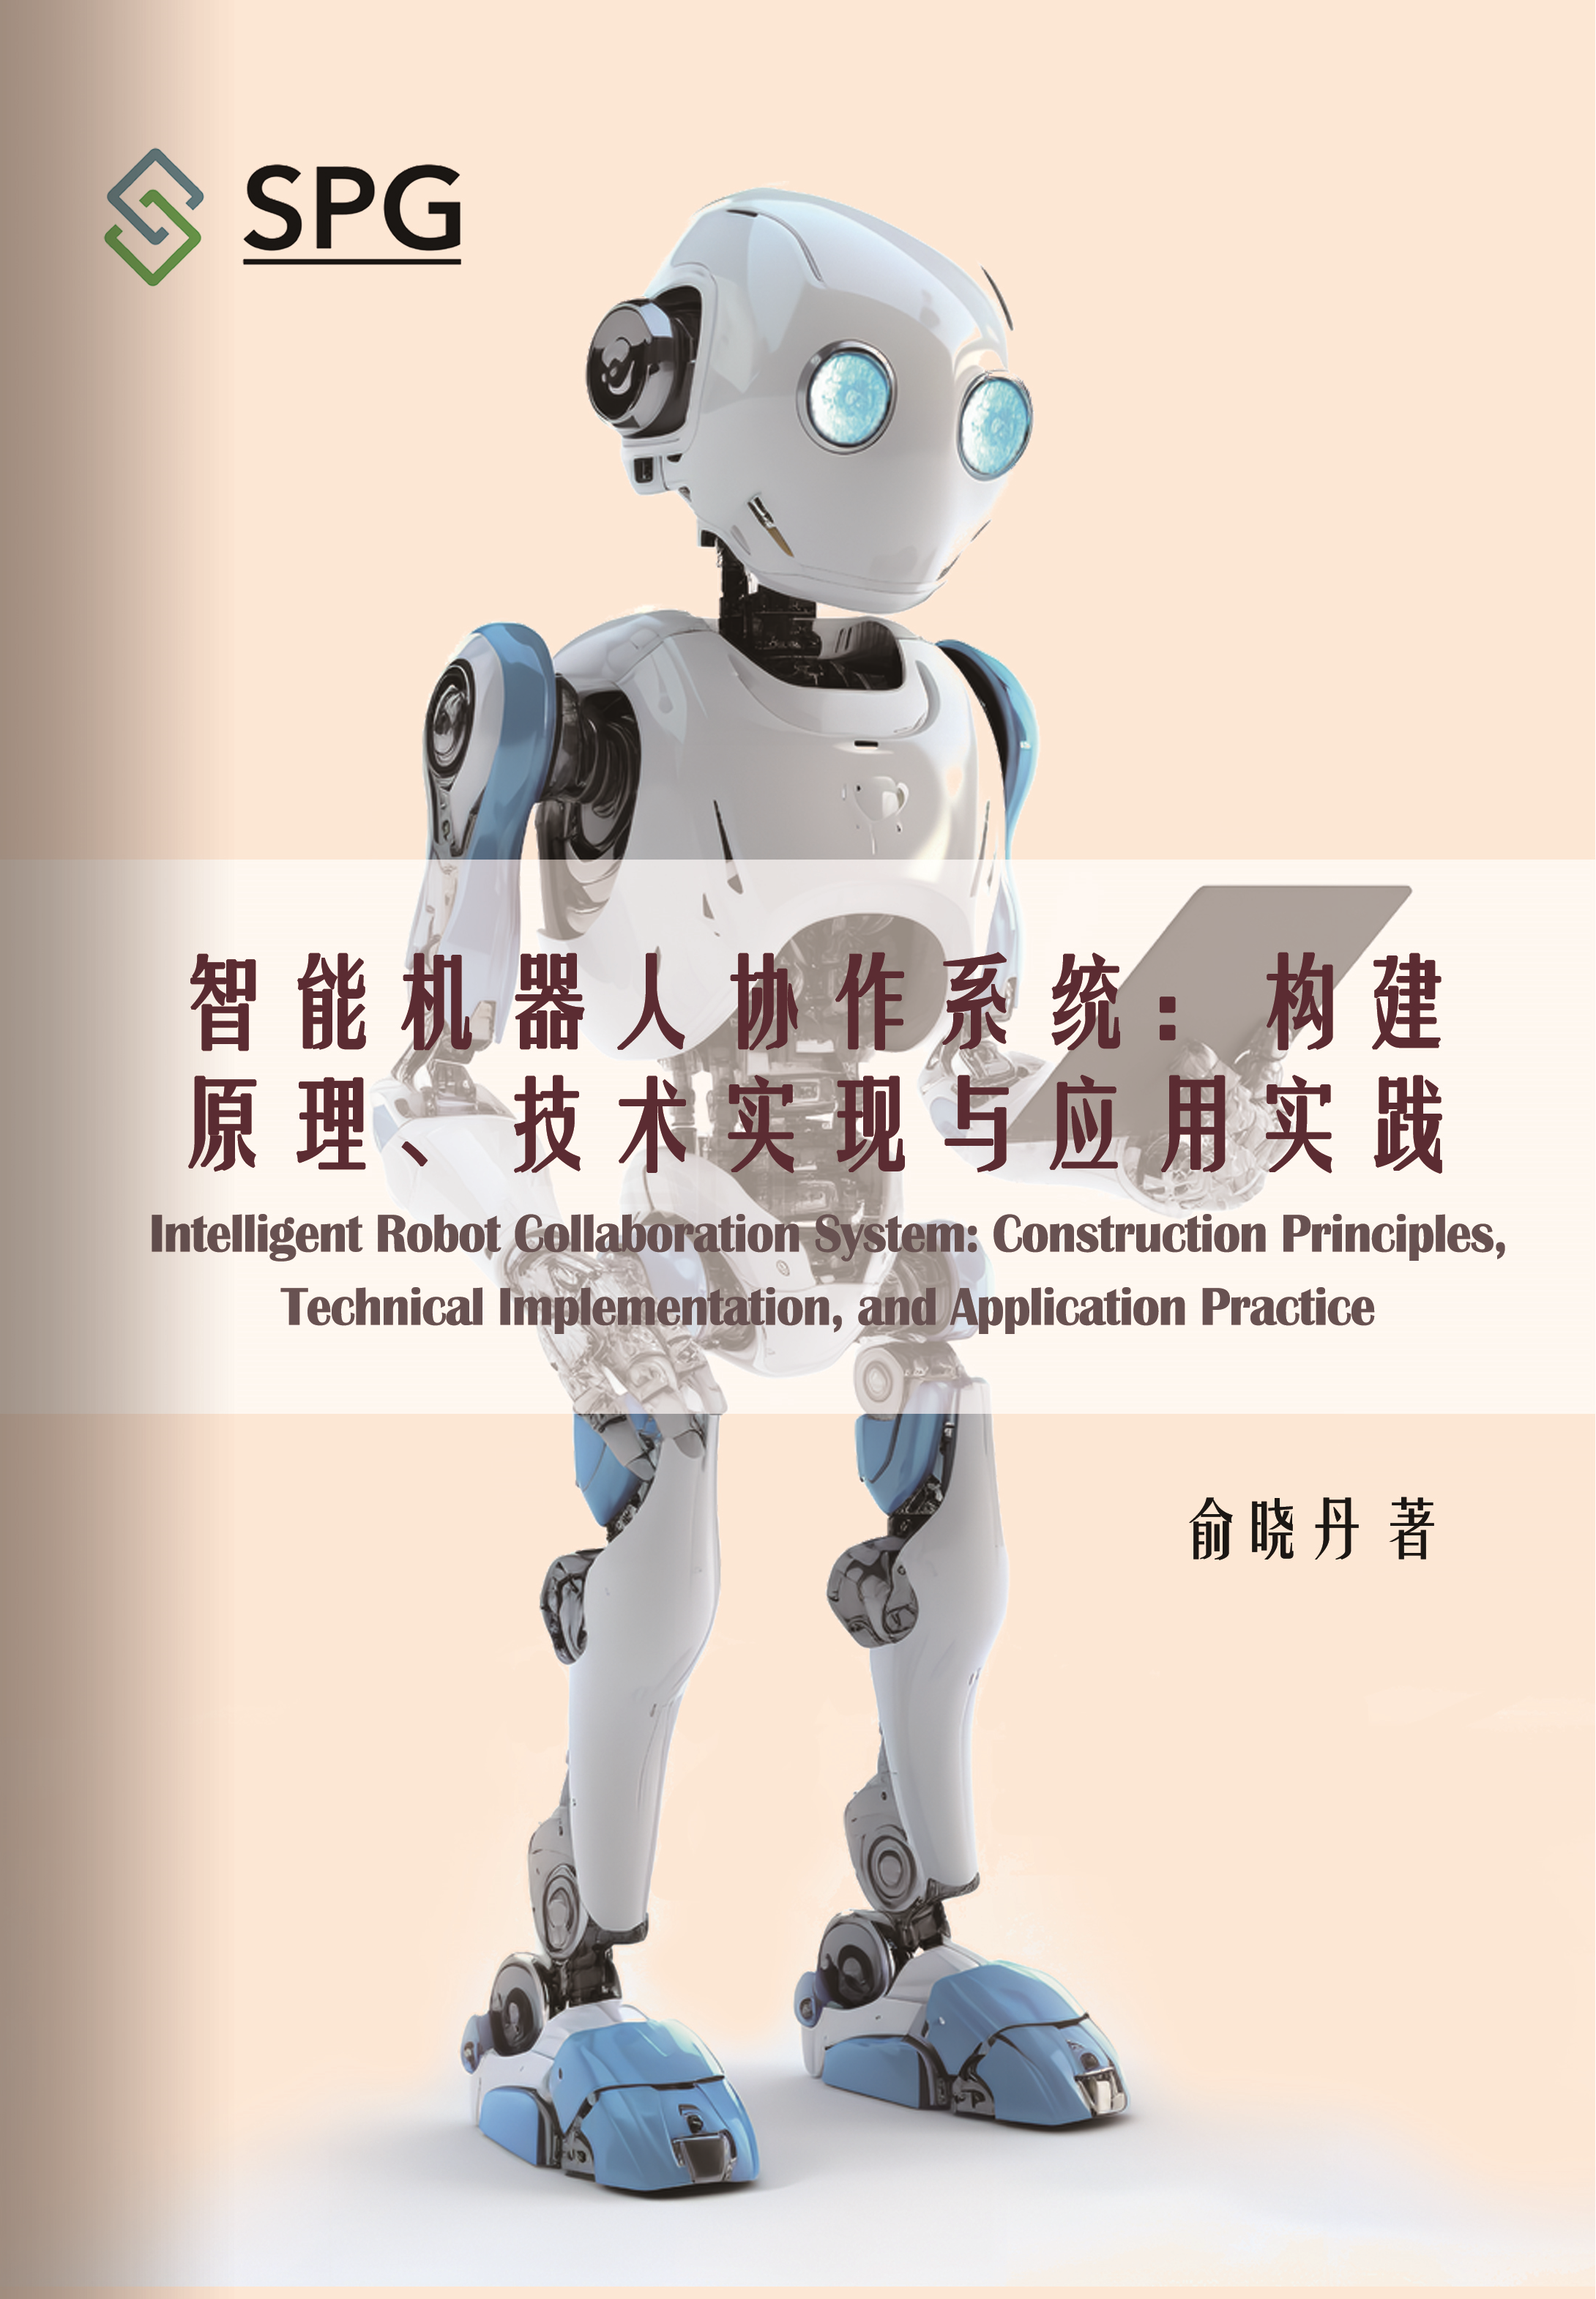 Intelligent Robot Collaboration System: Construction Principles, Technical Implementation, and Application Practice | Scholar Publishing Group